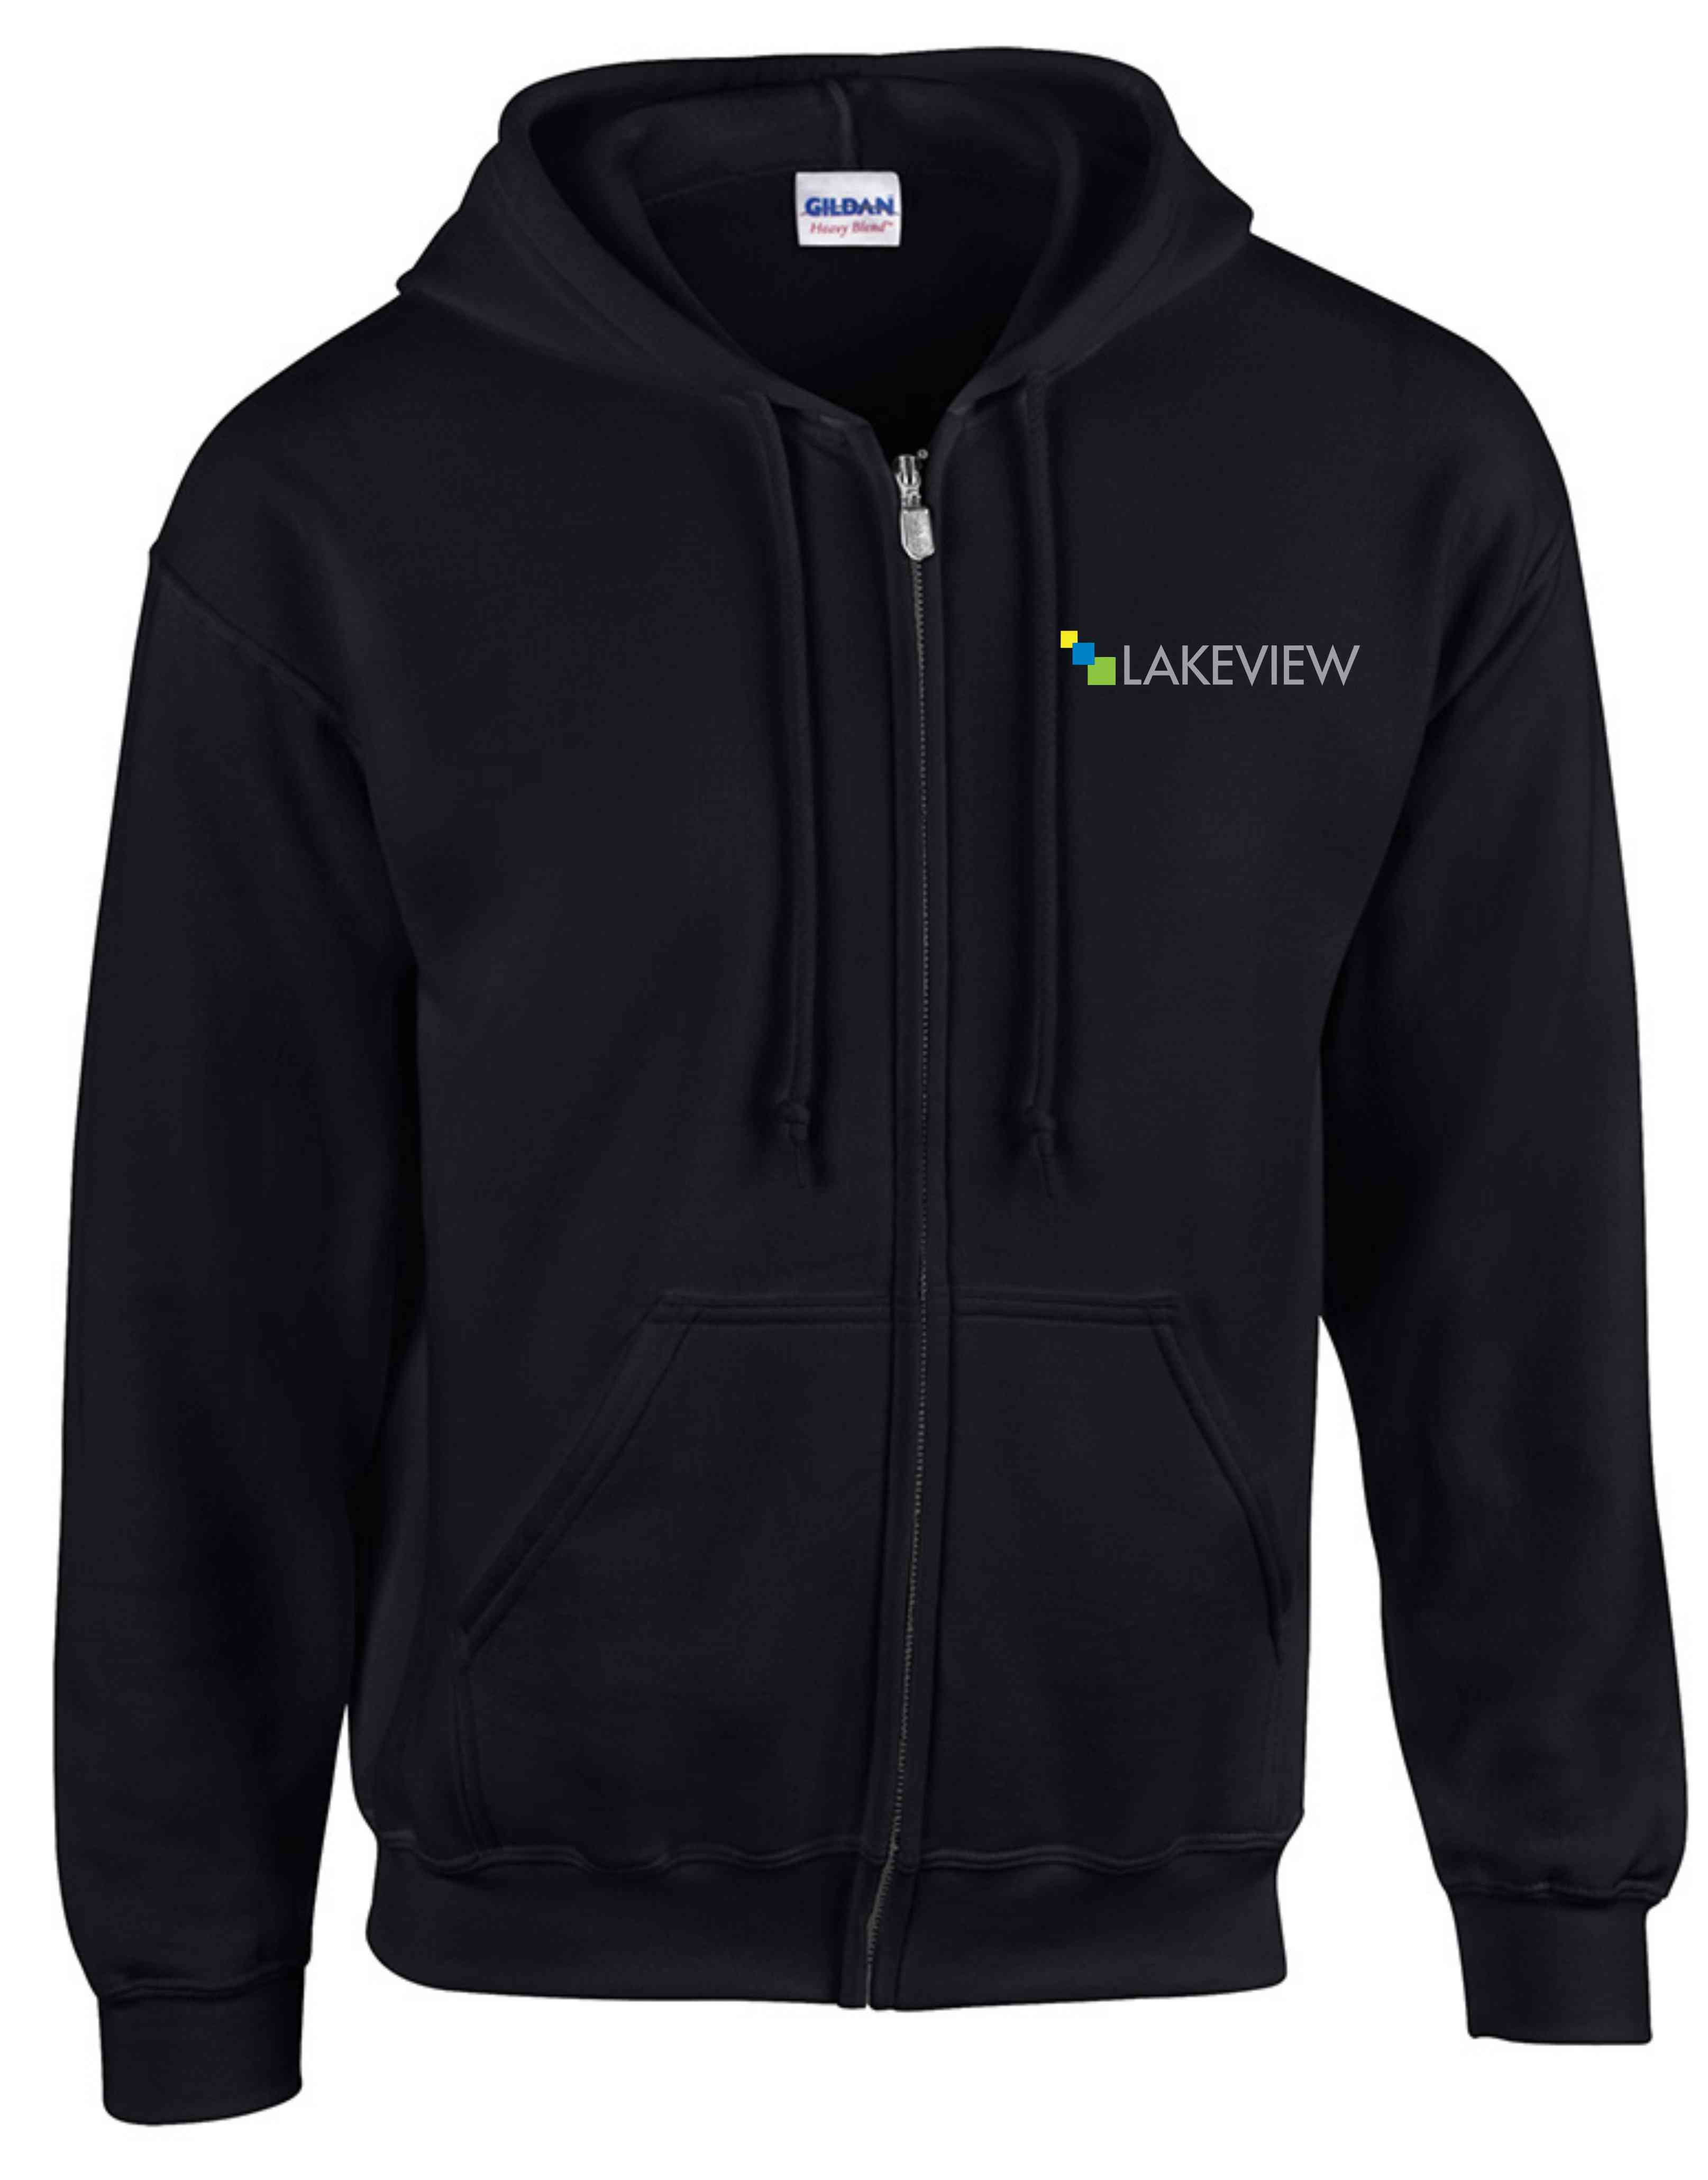 Download Lakeview Adult ATC Cotton/Polyester Full Zip Hooded ...